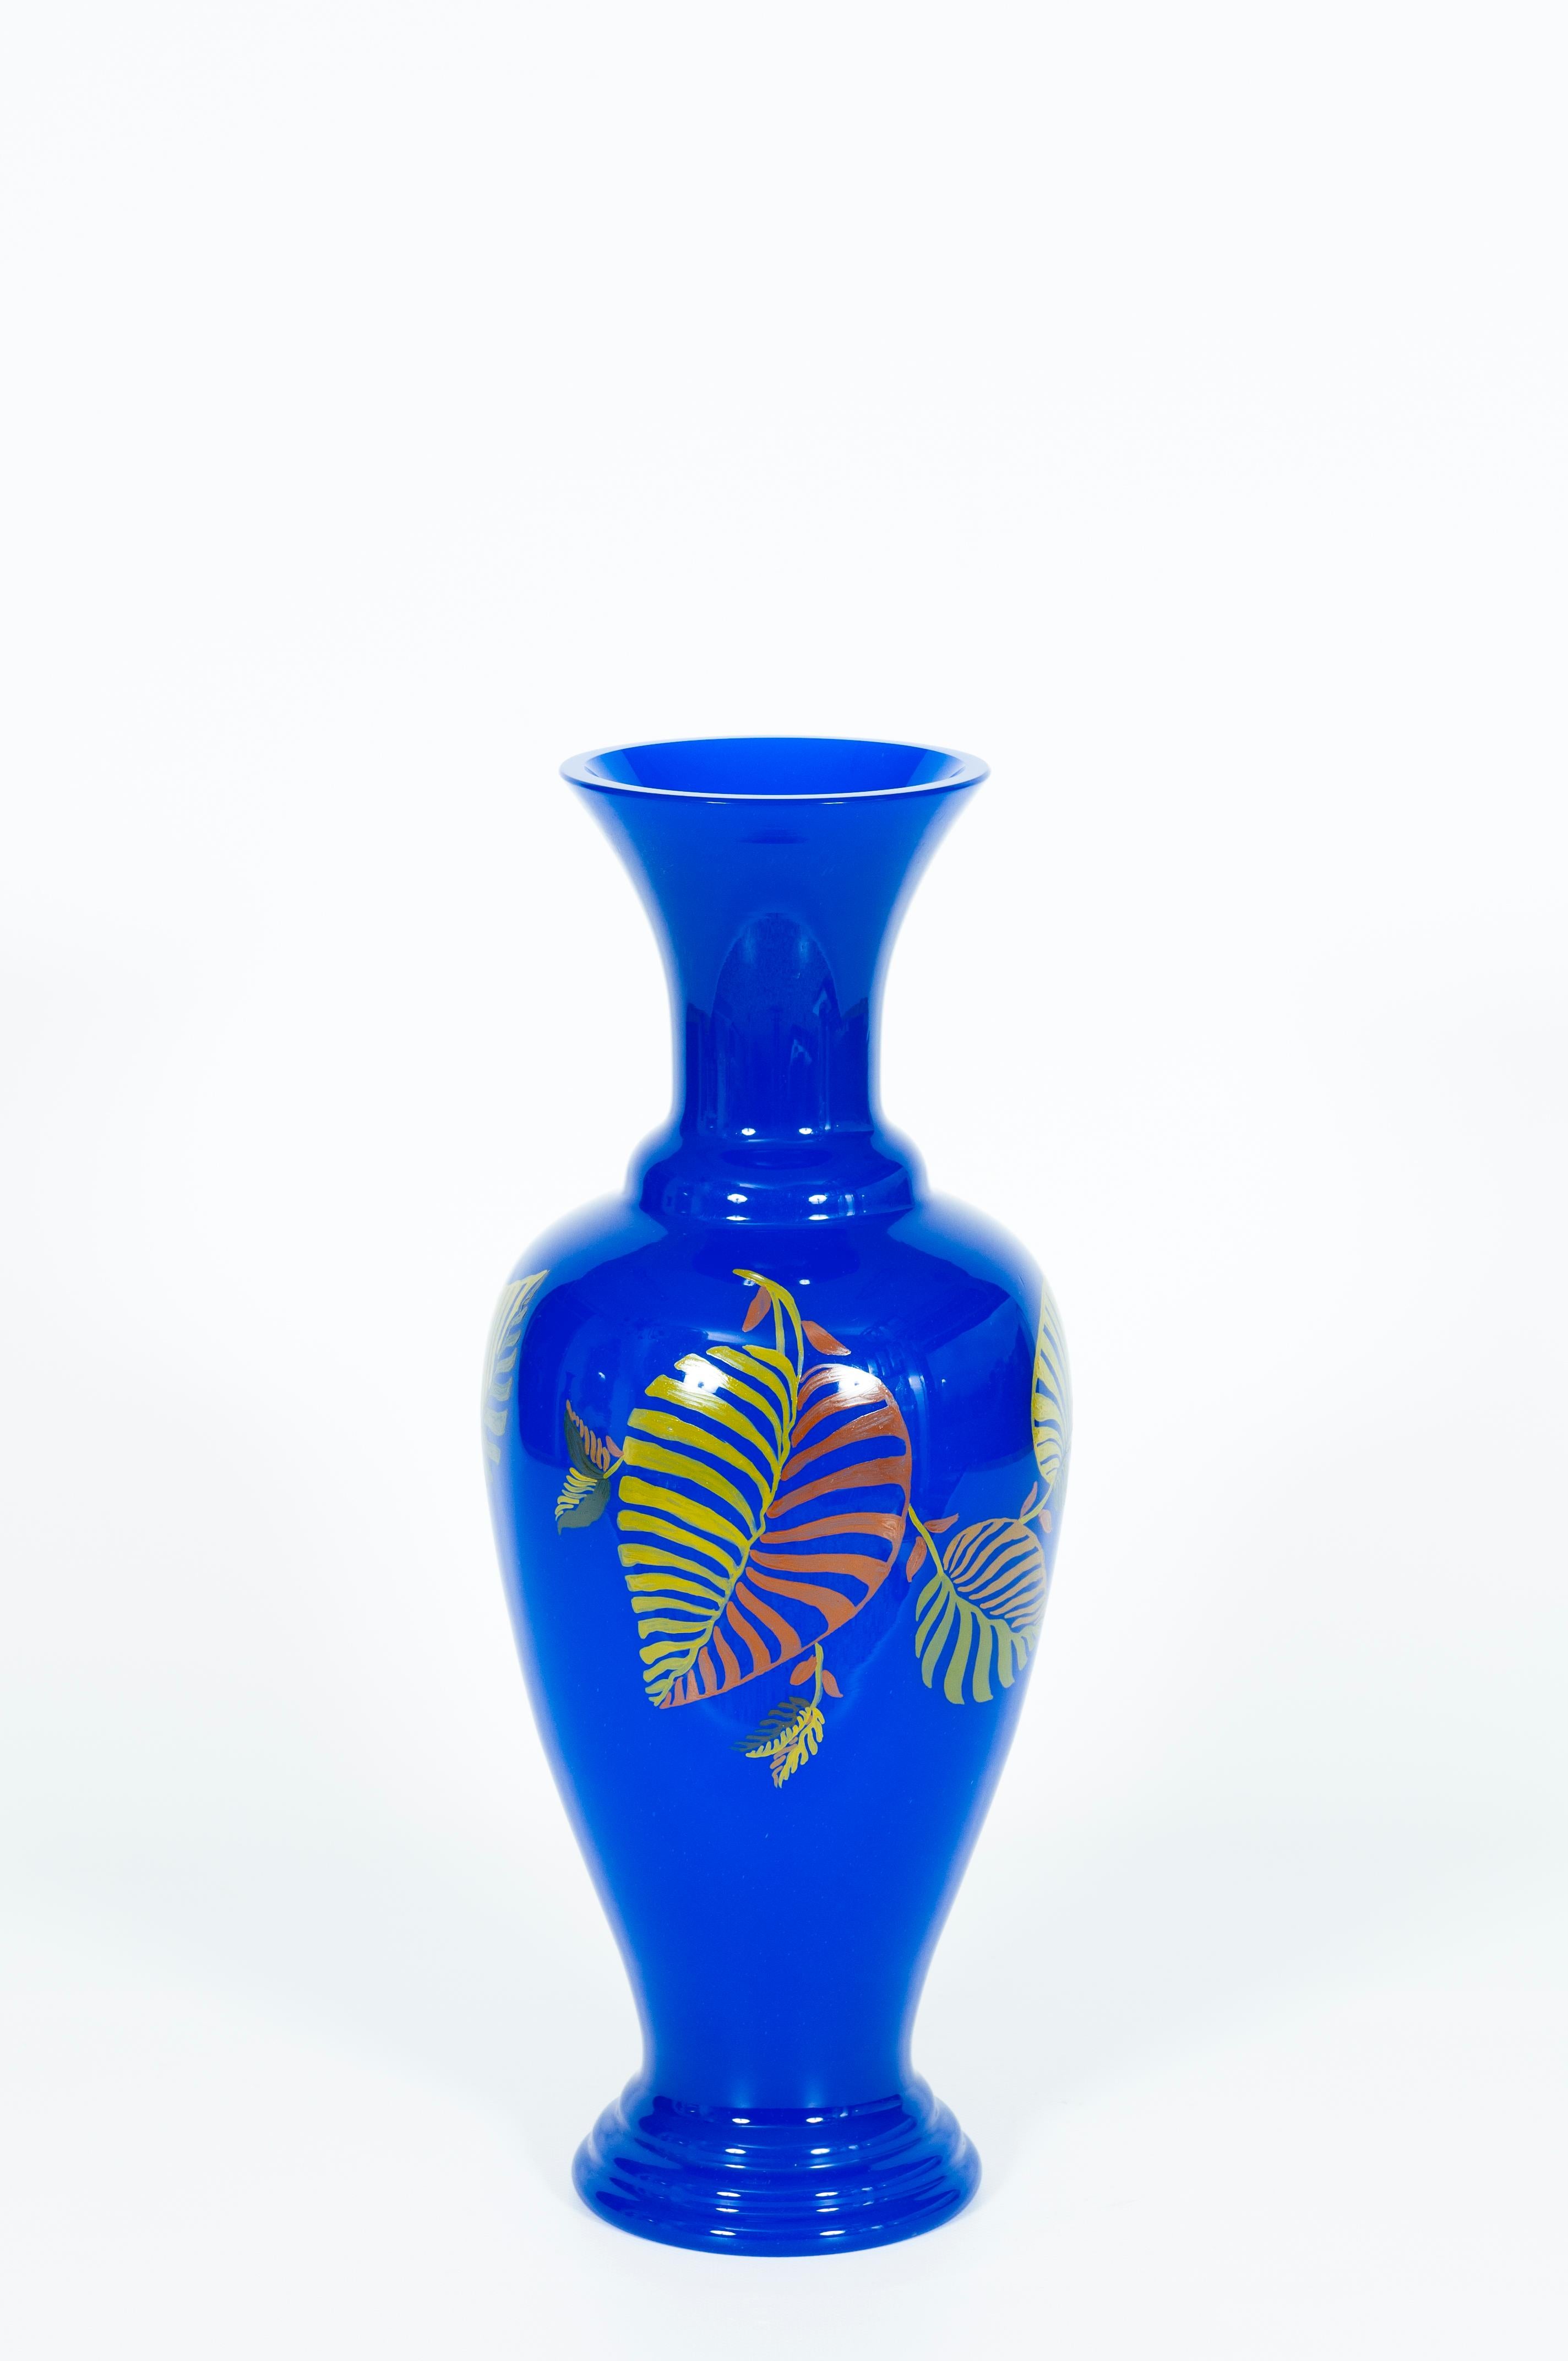 Blue Pair of Murano Glass Vases with Art Painting, Giovanni Dalla Fina, 1980s For Sale 5